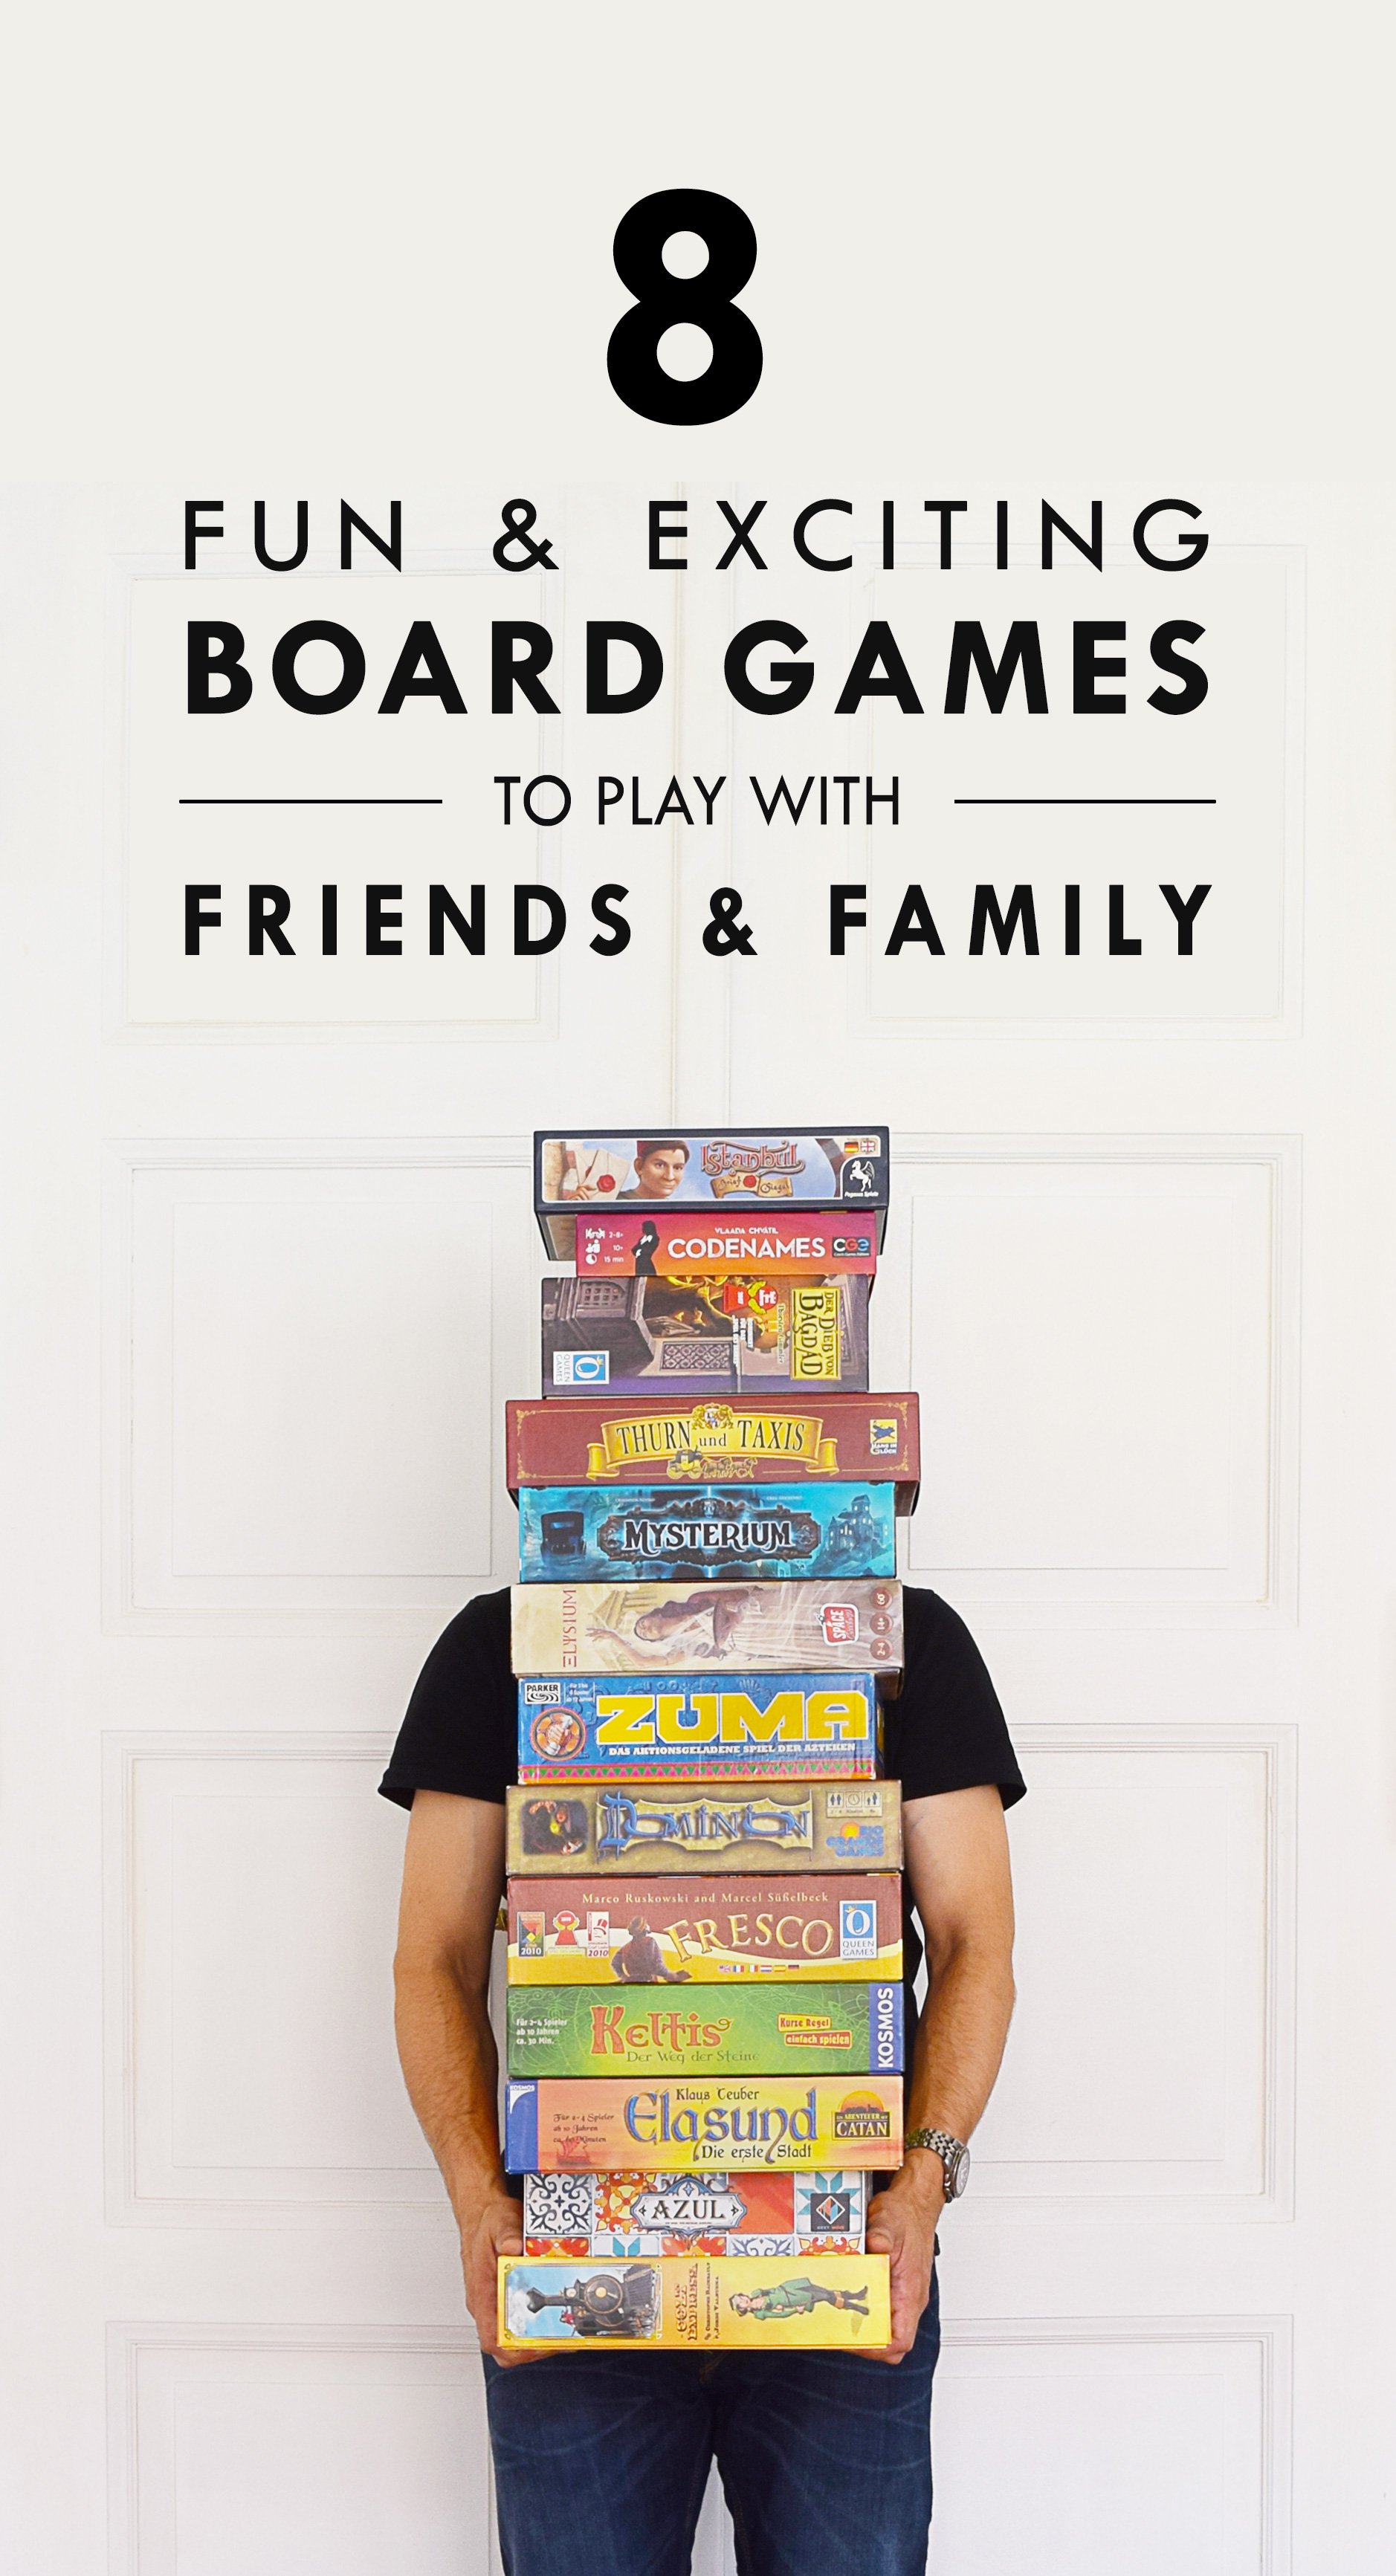 10 games to play with friends